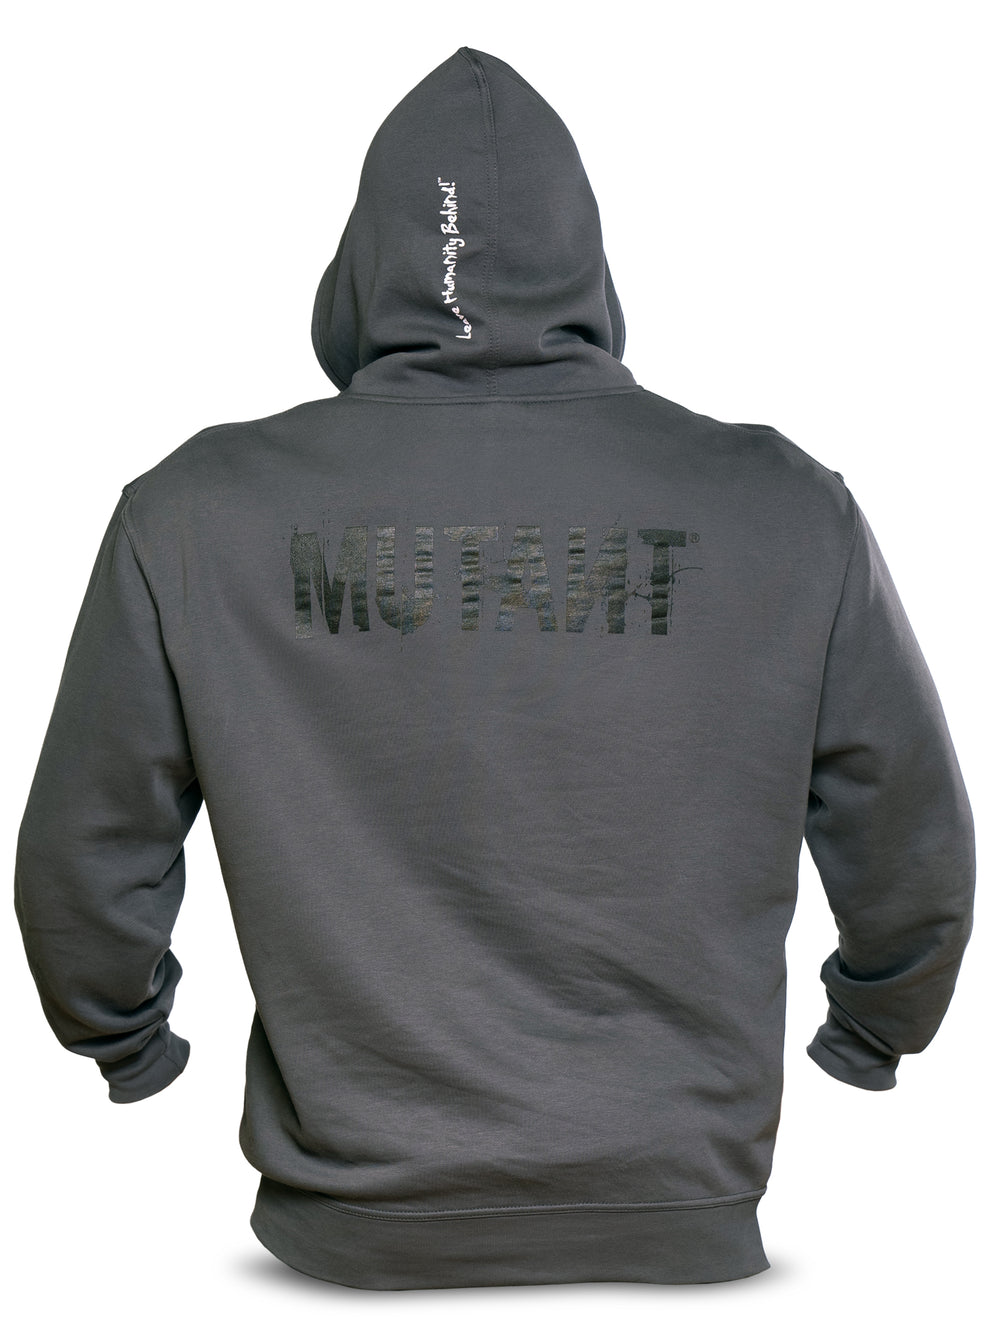 Back view of Grey Mutant Patched Zip-Up Gym Hoodie featuring a black Mutant logo on the back and the Mutant motto 'Leave Humanity Behind' in white on the hood. White background.